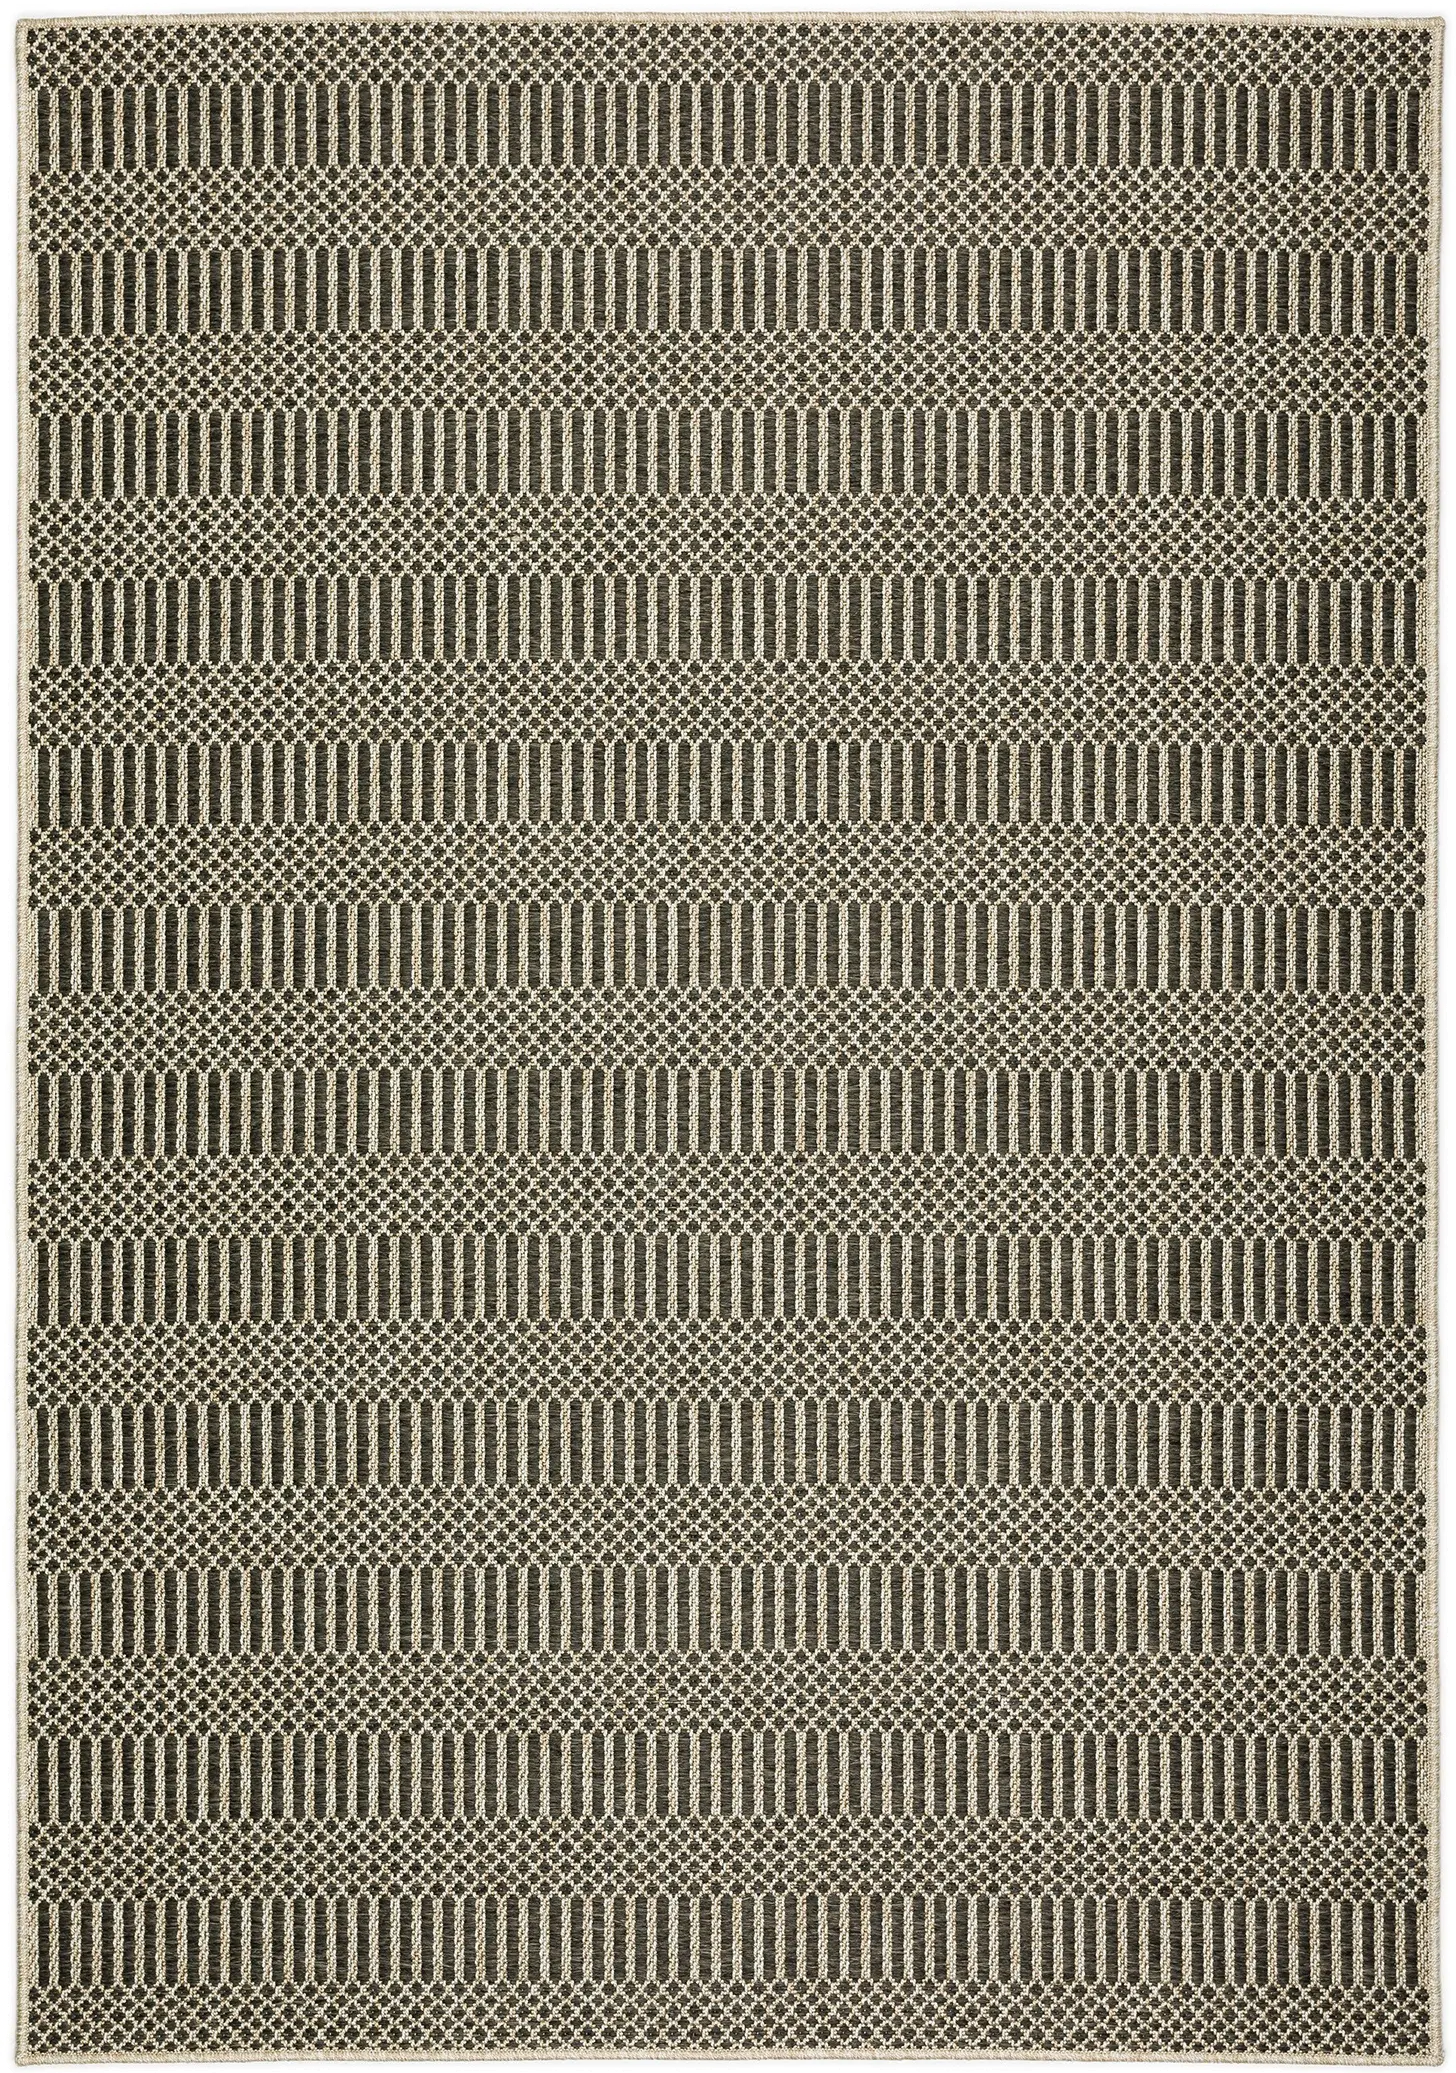 Bali 8 x 10 Grasse Charcoal Outdoor Patio Rug